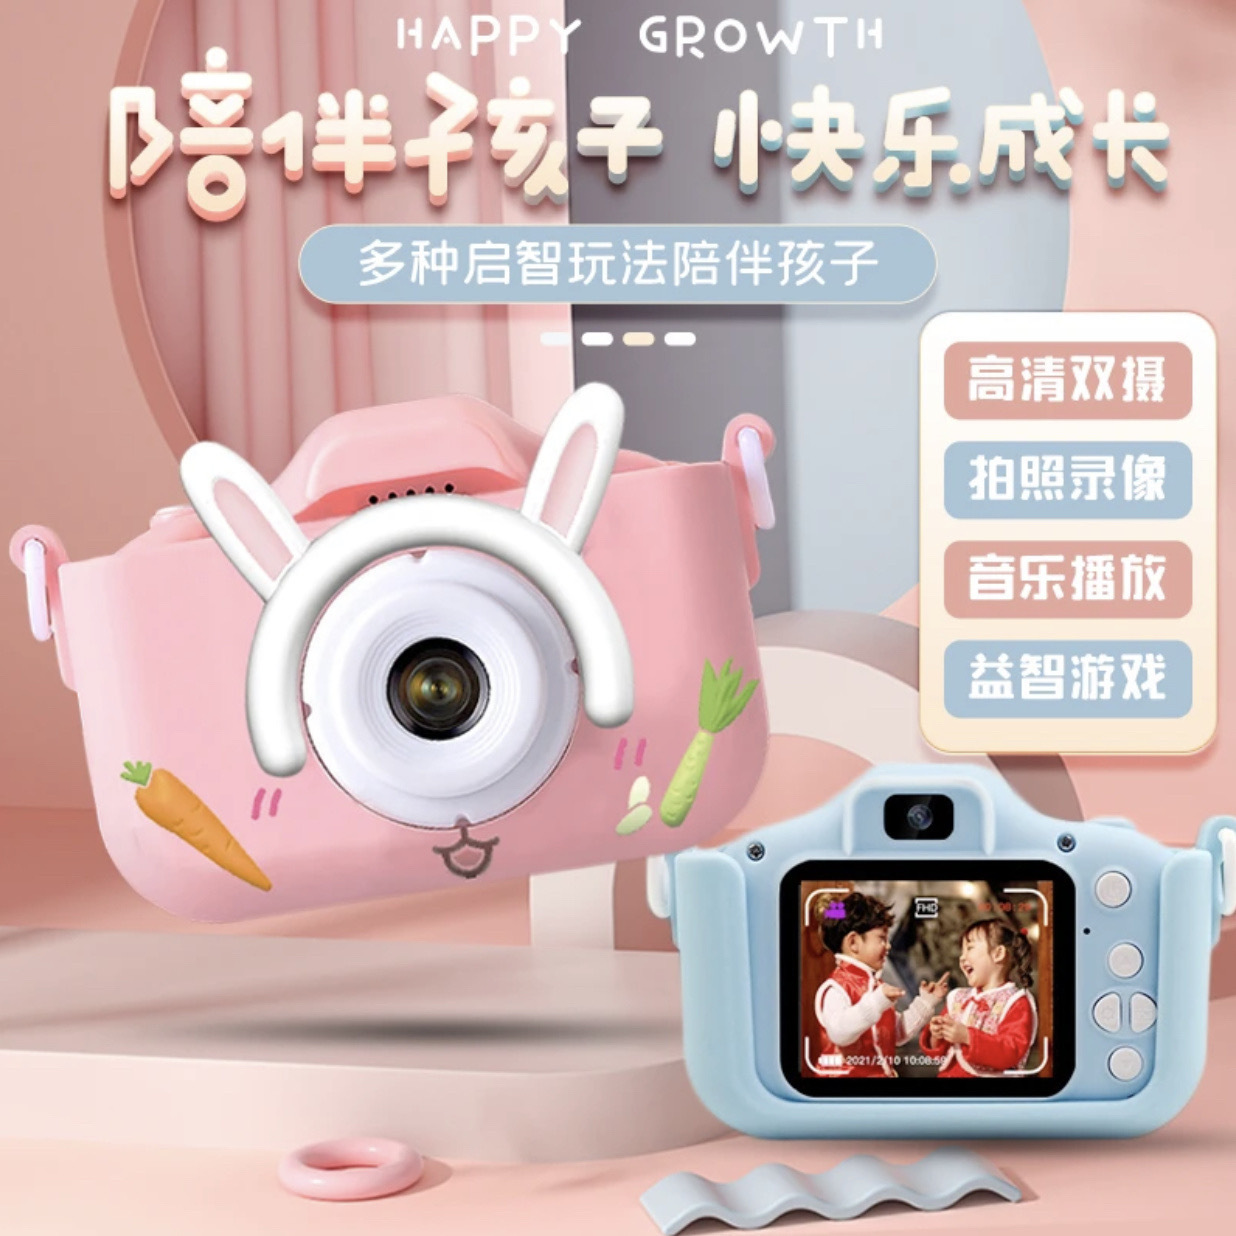 Children's Camera Can Take Photos and Video Children's Birthday Gift Small Slr Polaroid Camera Cartoon Toy